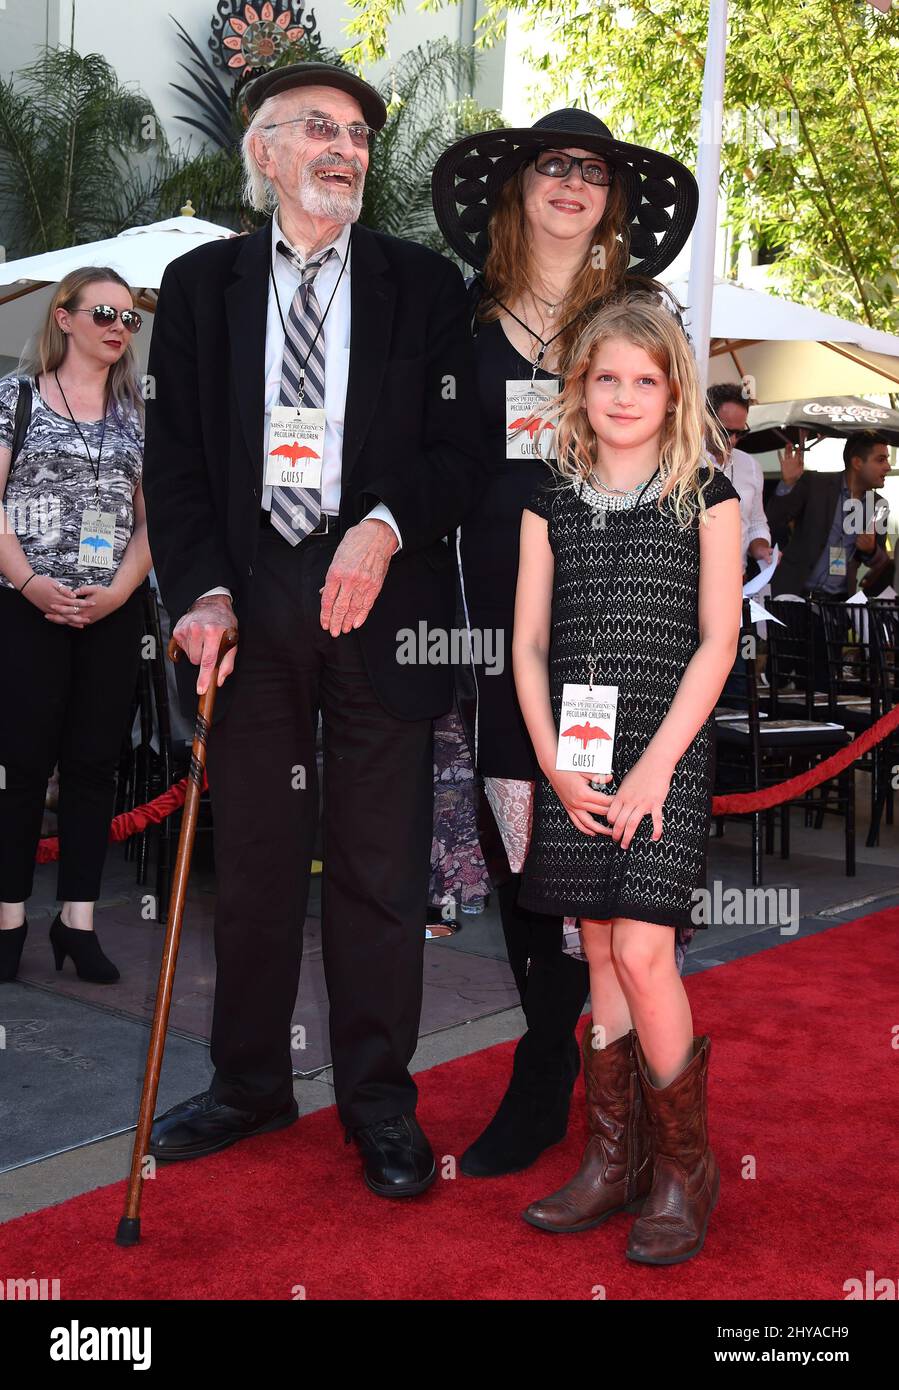 Martin Landau, Susan Landau Finch and Aria Finch at Tim Burtons hand and footprint ceremony held at the TCL Chinese Theatre Imax Hollywood on Thursday, Sept. 8, 2016, in Los Angeles. Stock Photo